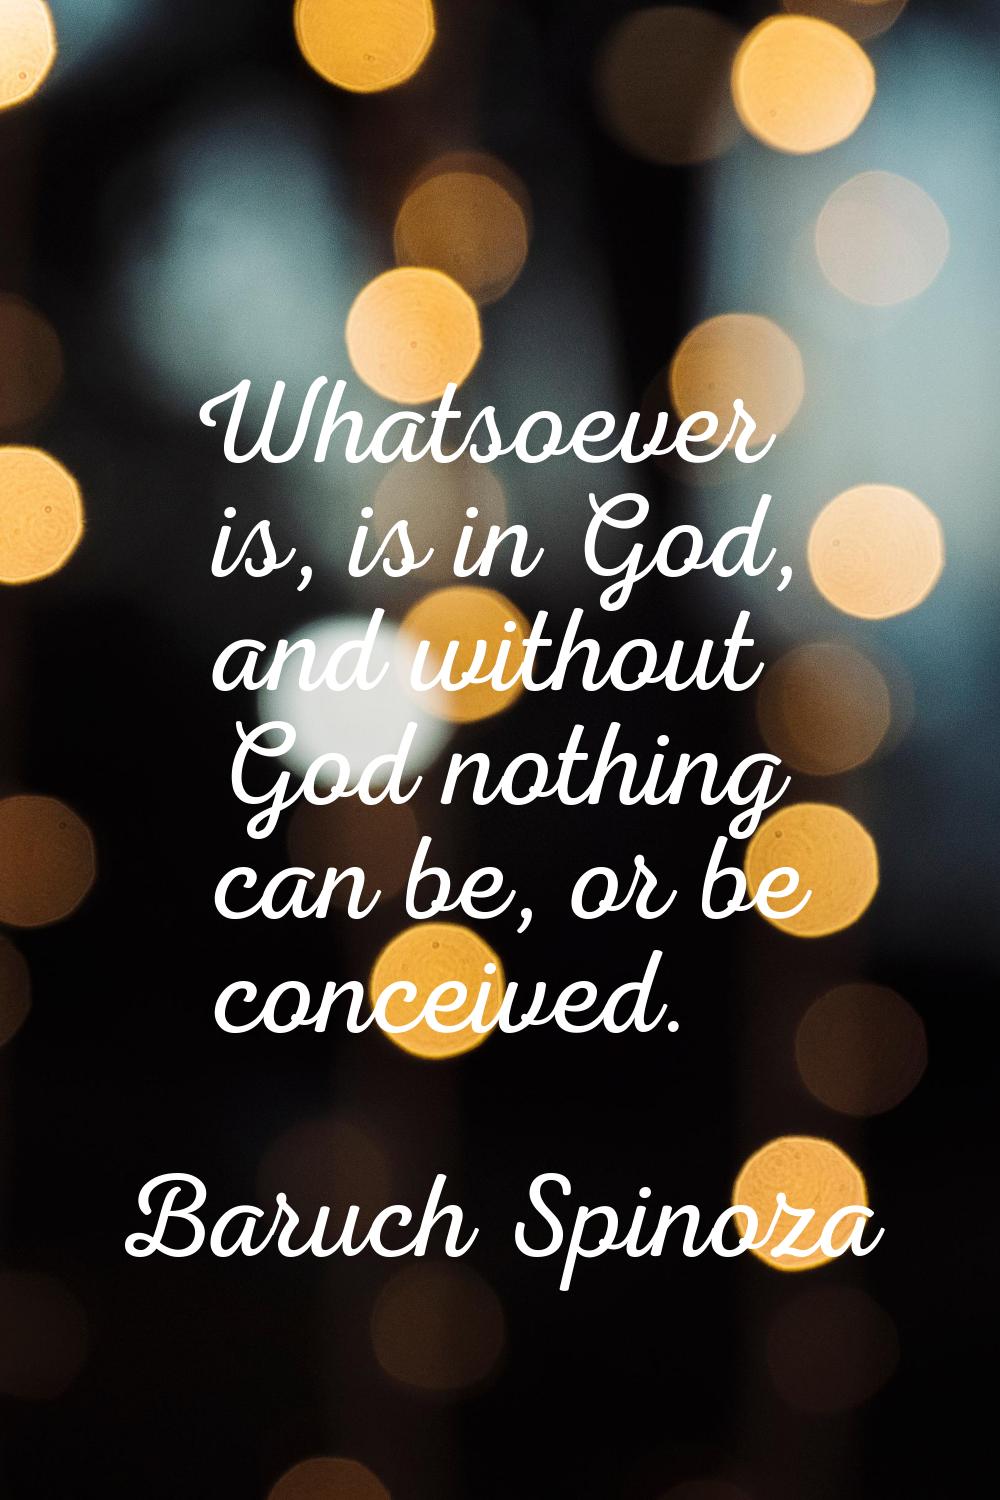 Whatsoever is, is in God, and without God nothing can be, or be conceived.